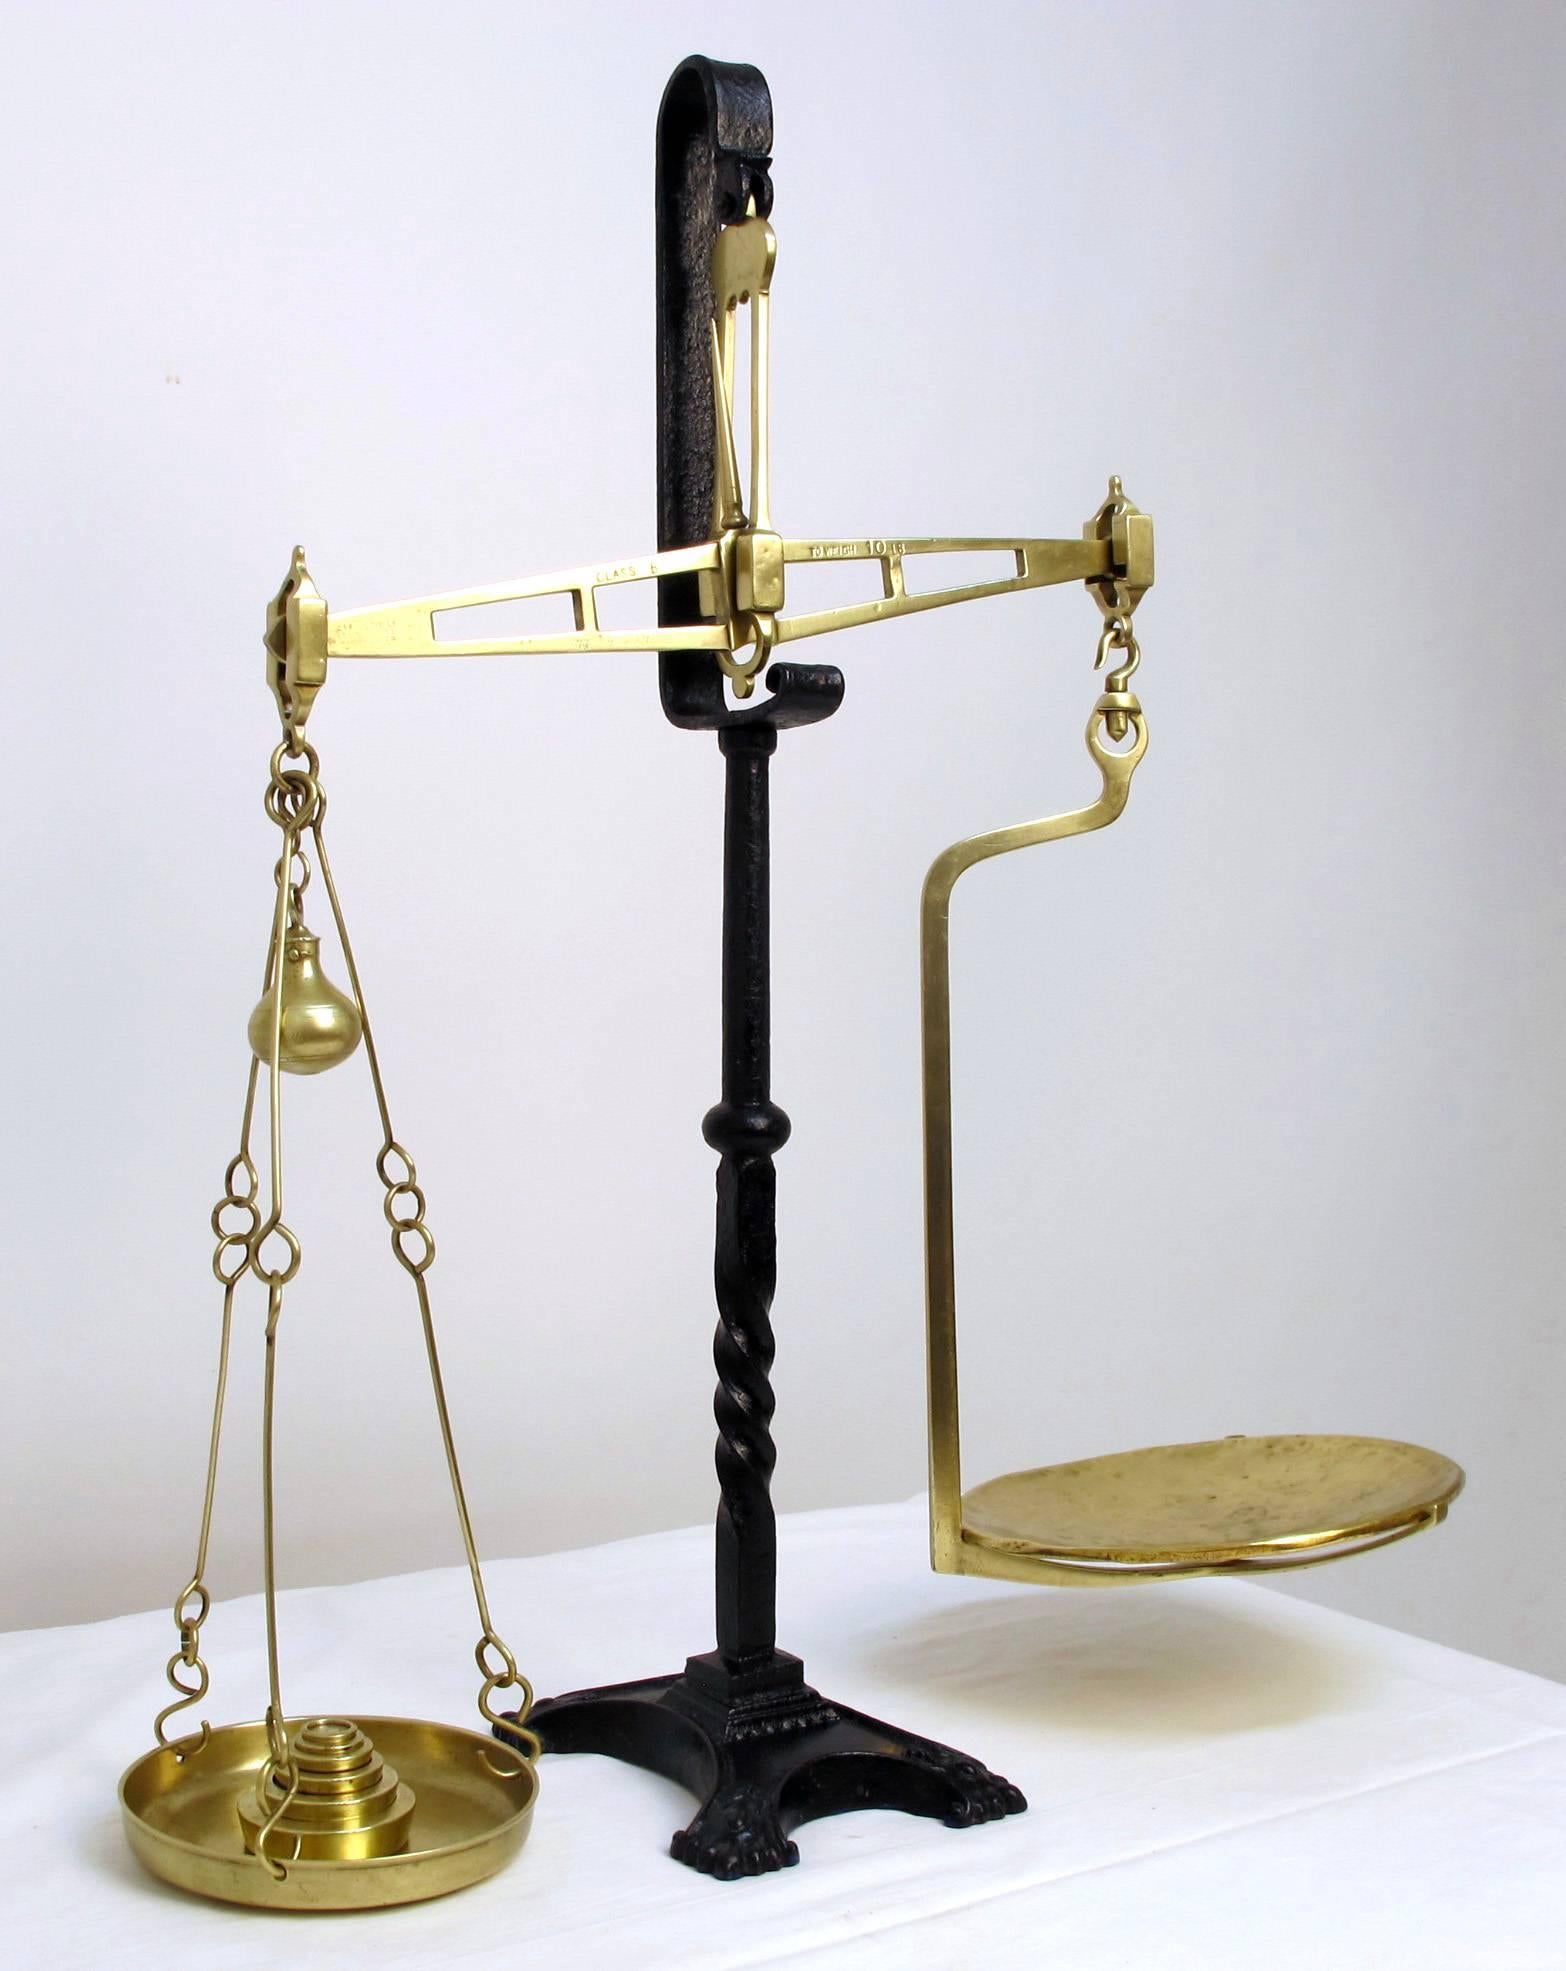 A large antique scale. Cast and wrought iron base with brass balance and weights. European (probably French), late 18th-early 19th century.